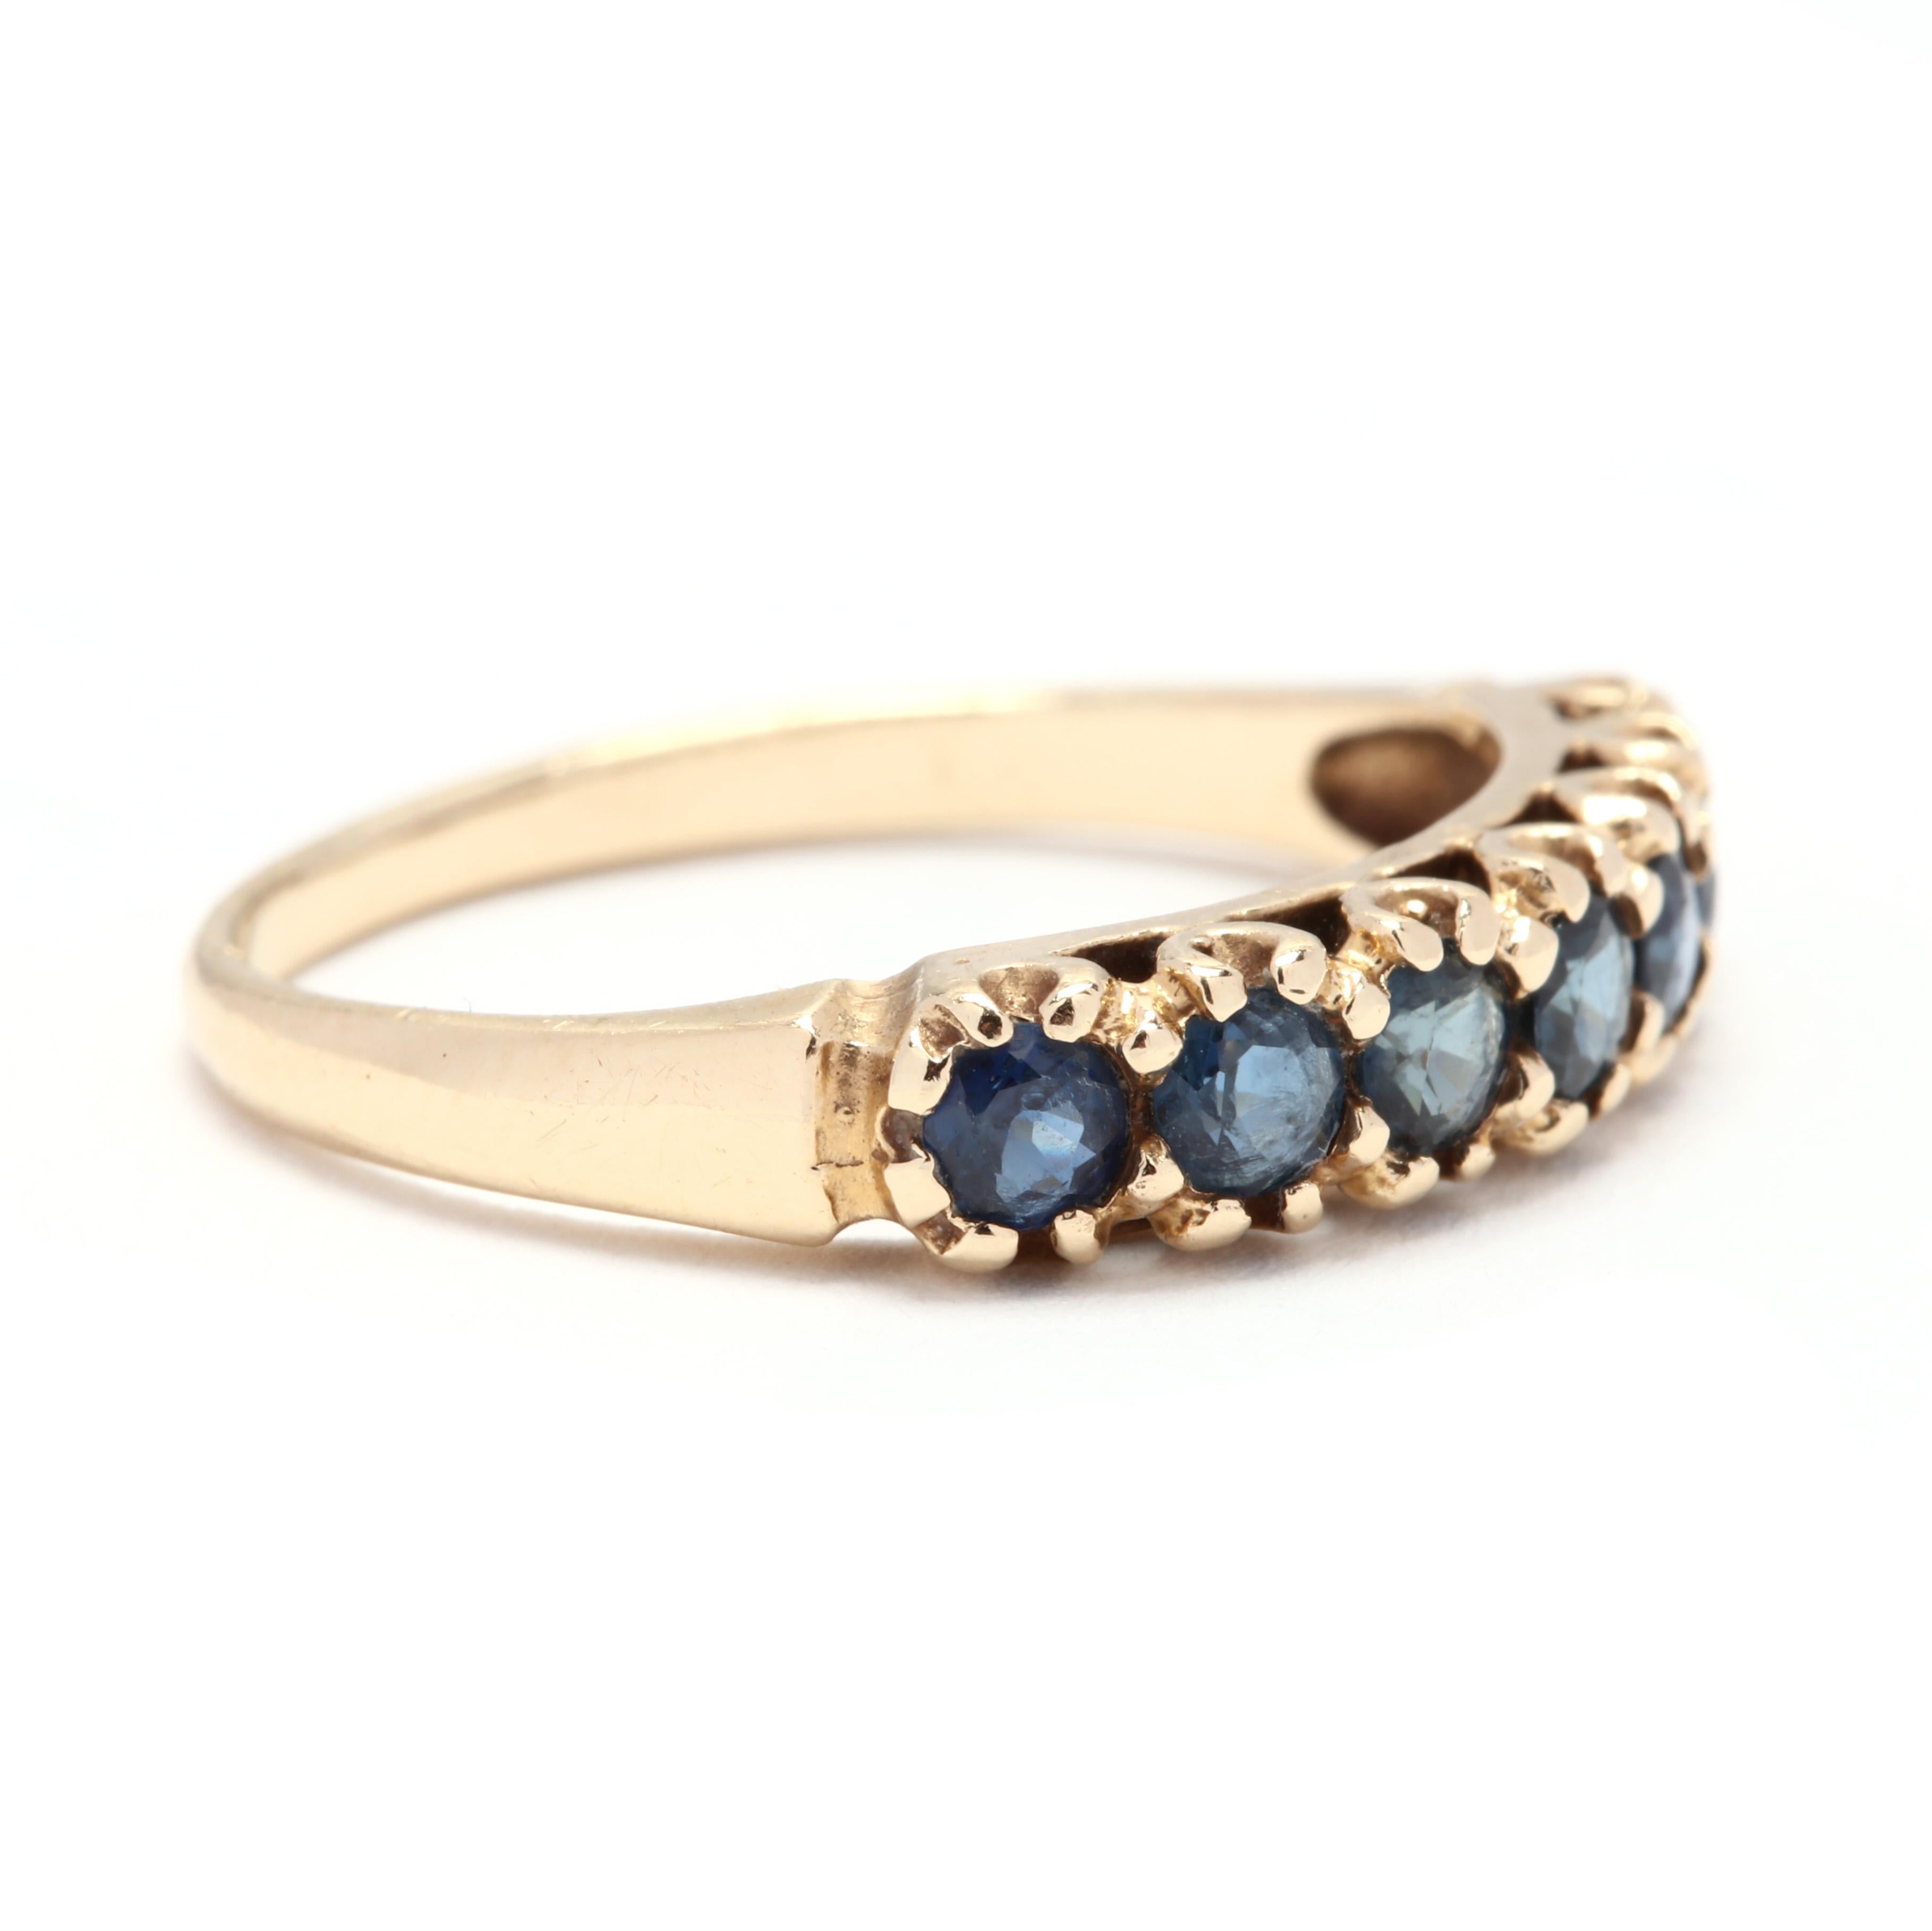 A vintage 14 karat yellow gold and sapphire stackable band ring. This ring features a vintage style seven stone band ring set with round cut sapphires weighing approximately .85 total carats and a slightly tapered shank.

Stones:
- sapphires
- round